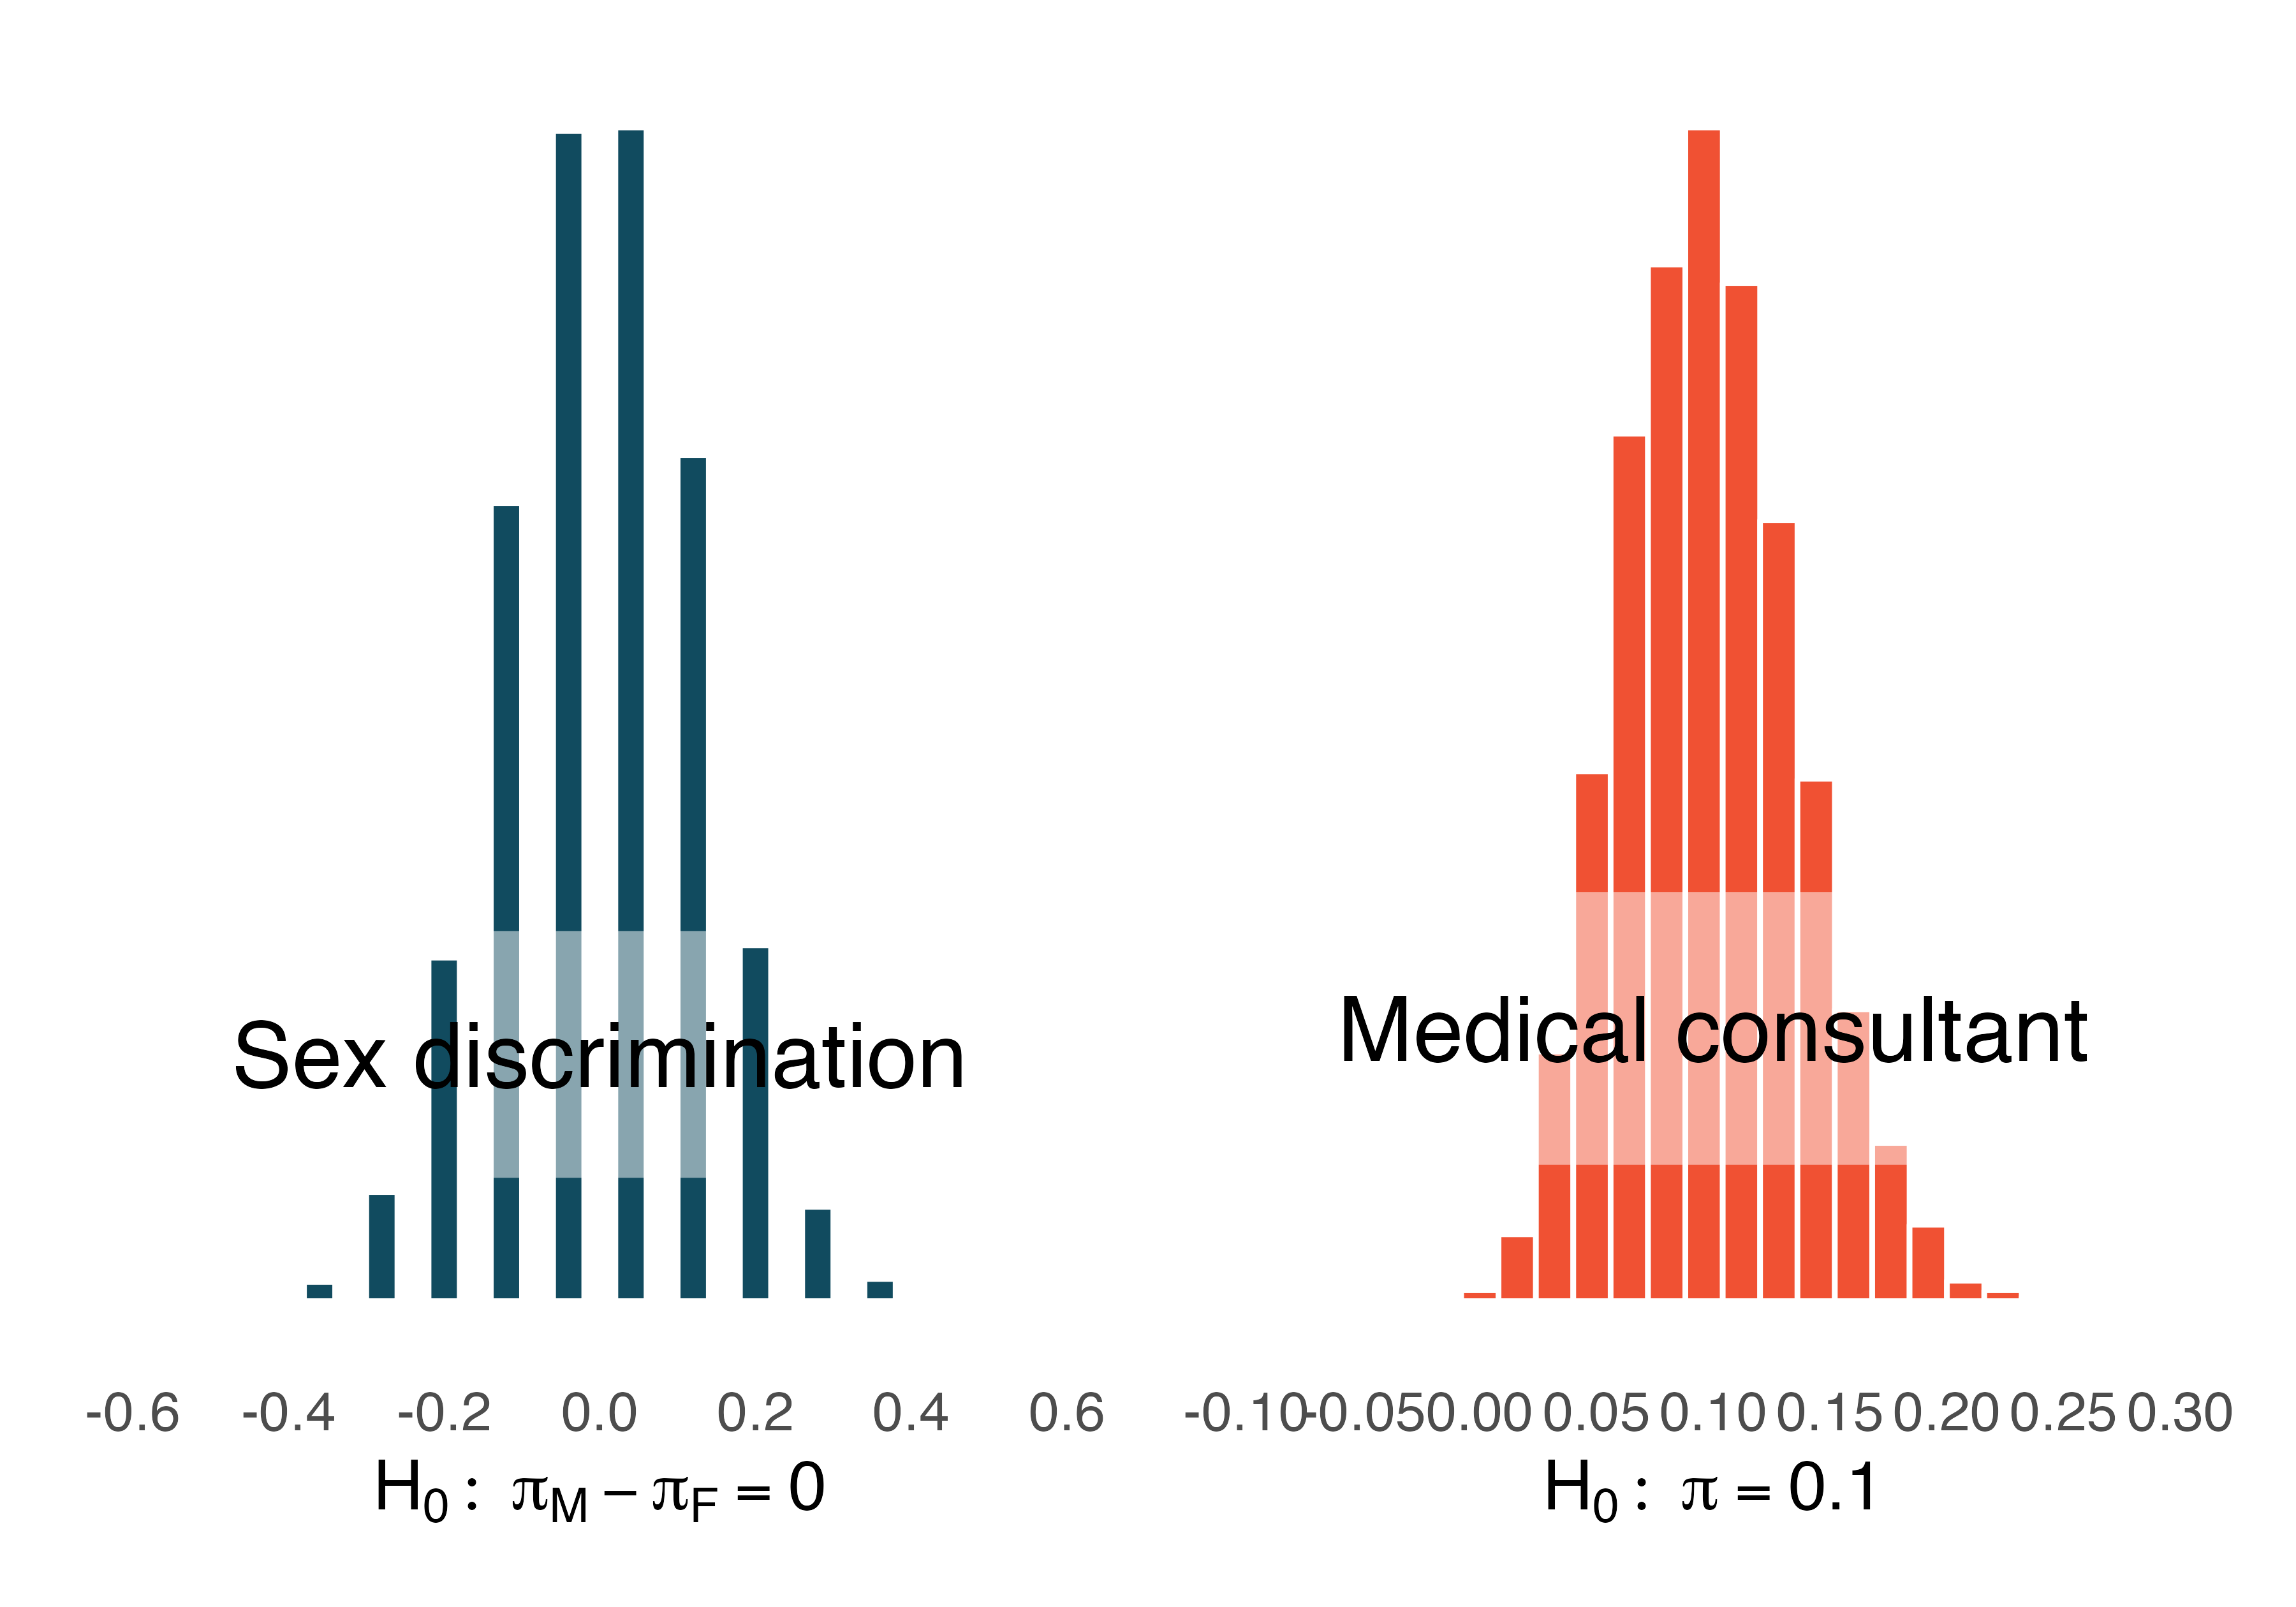 The null distribution for each of the two case studies presented previously. Note that the center of each distribution is given by the value of the parameter set in the null hypothesis.